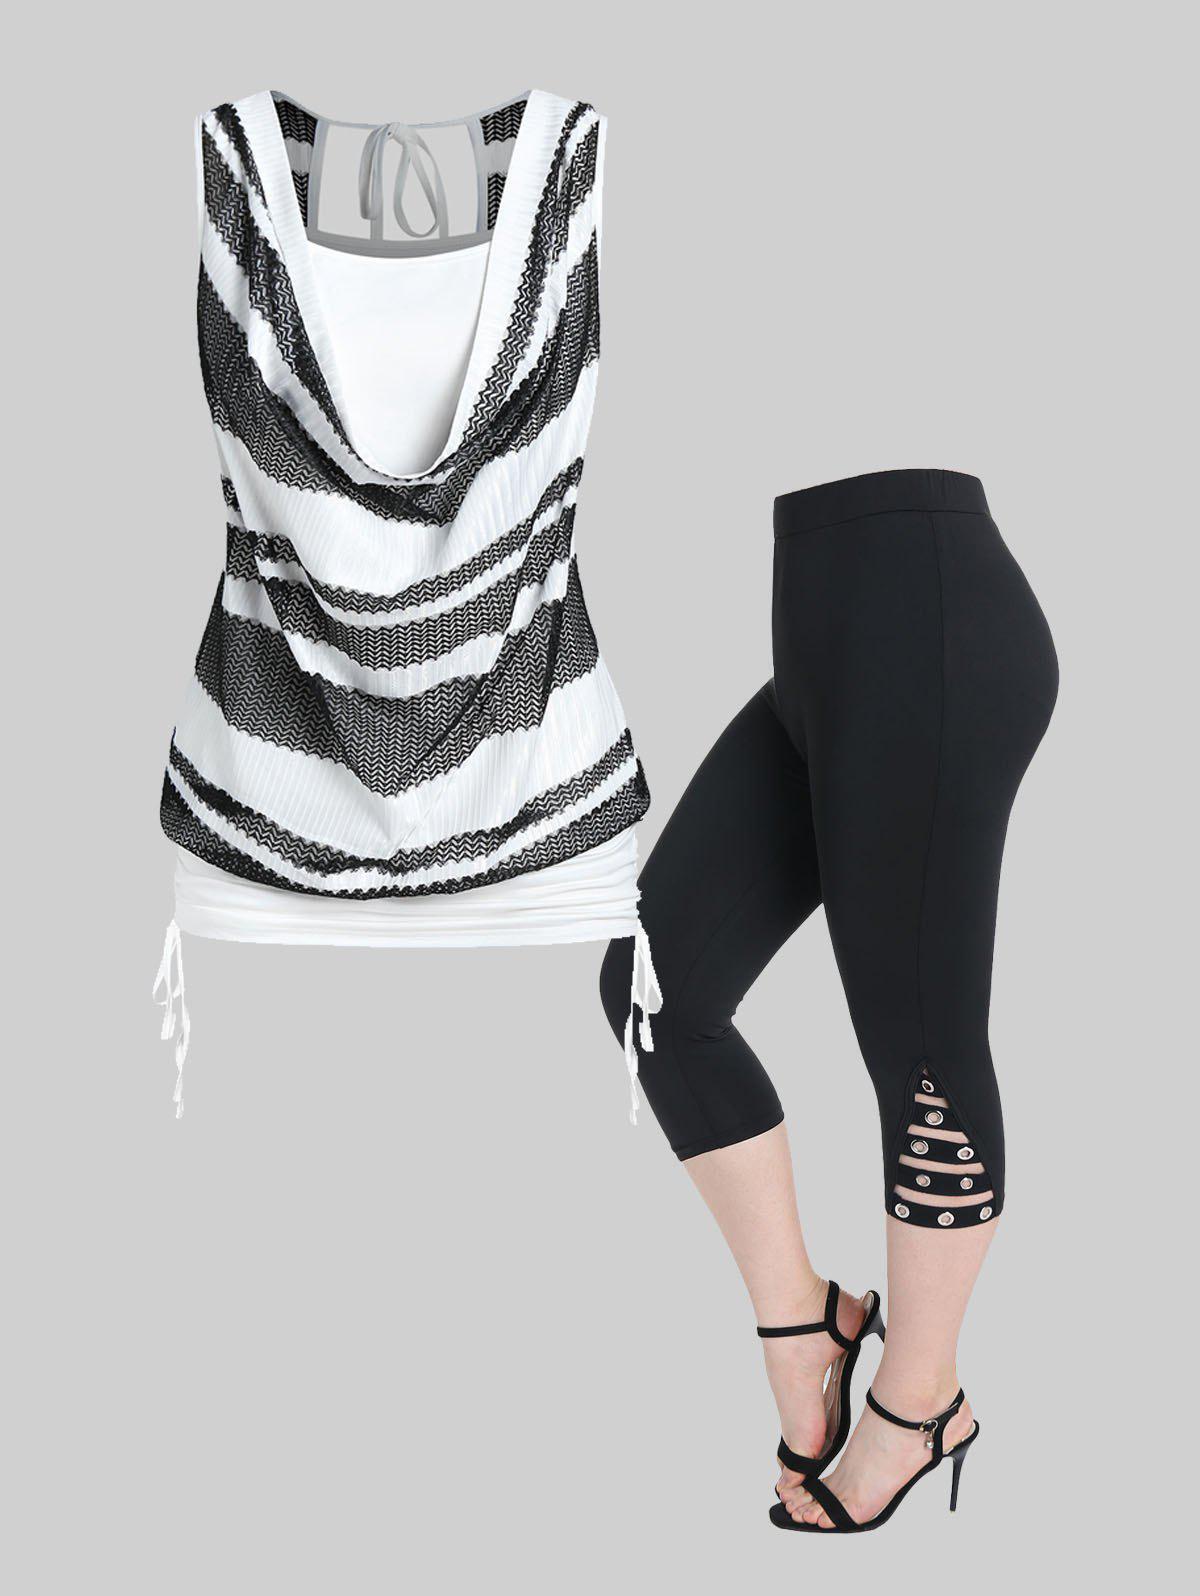 Cinched Cowl Front 2 in 1 Tank Top and Grommet Cutout Solid Leggings Plus Size Outfit